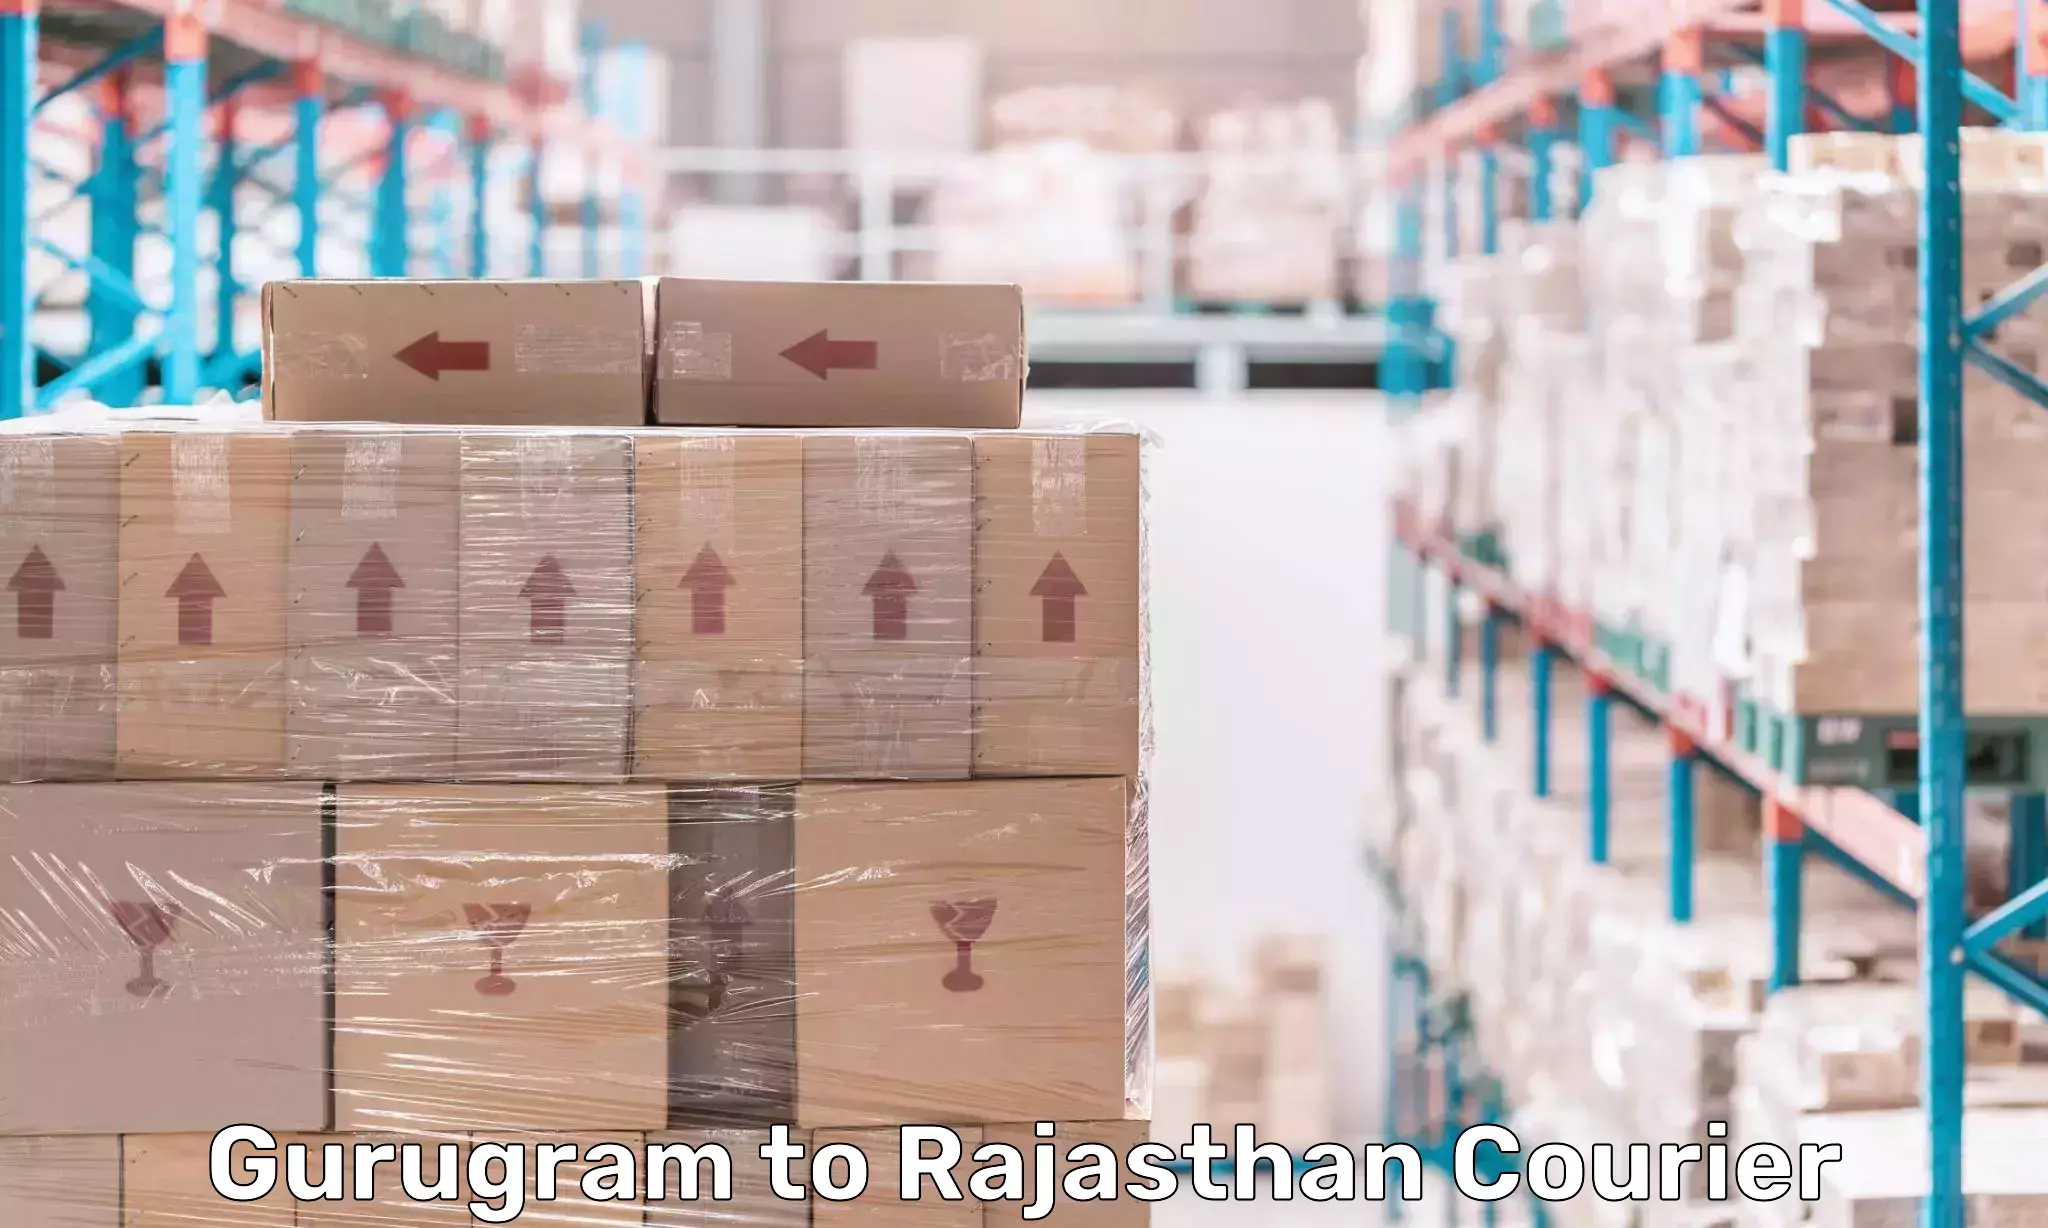 Multi-national courier services Gurugram to Rajasthan